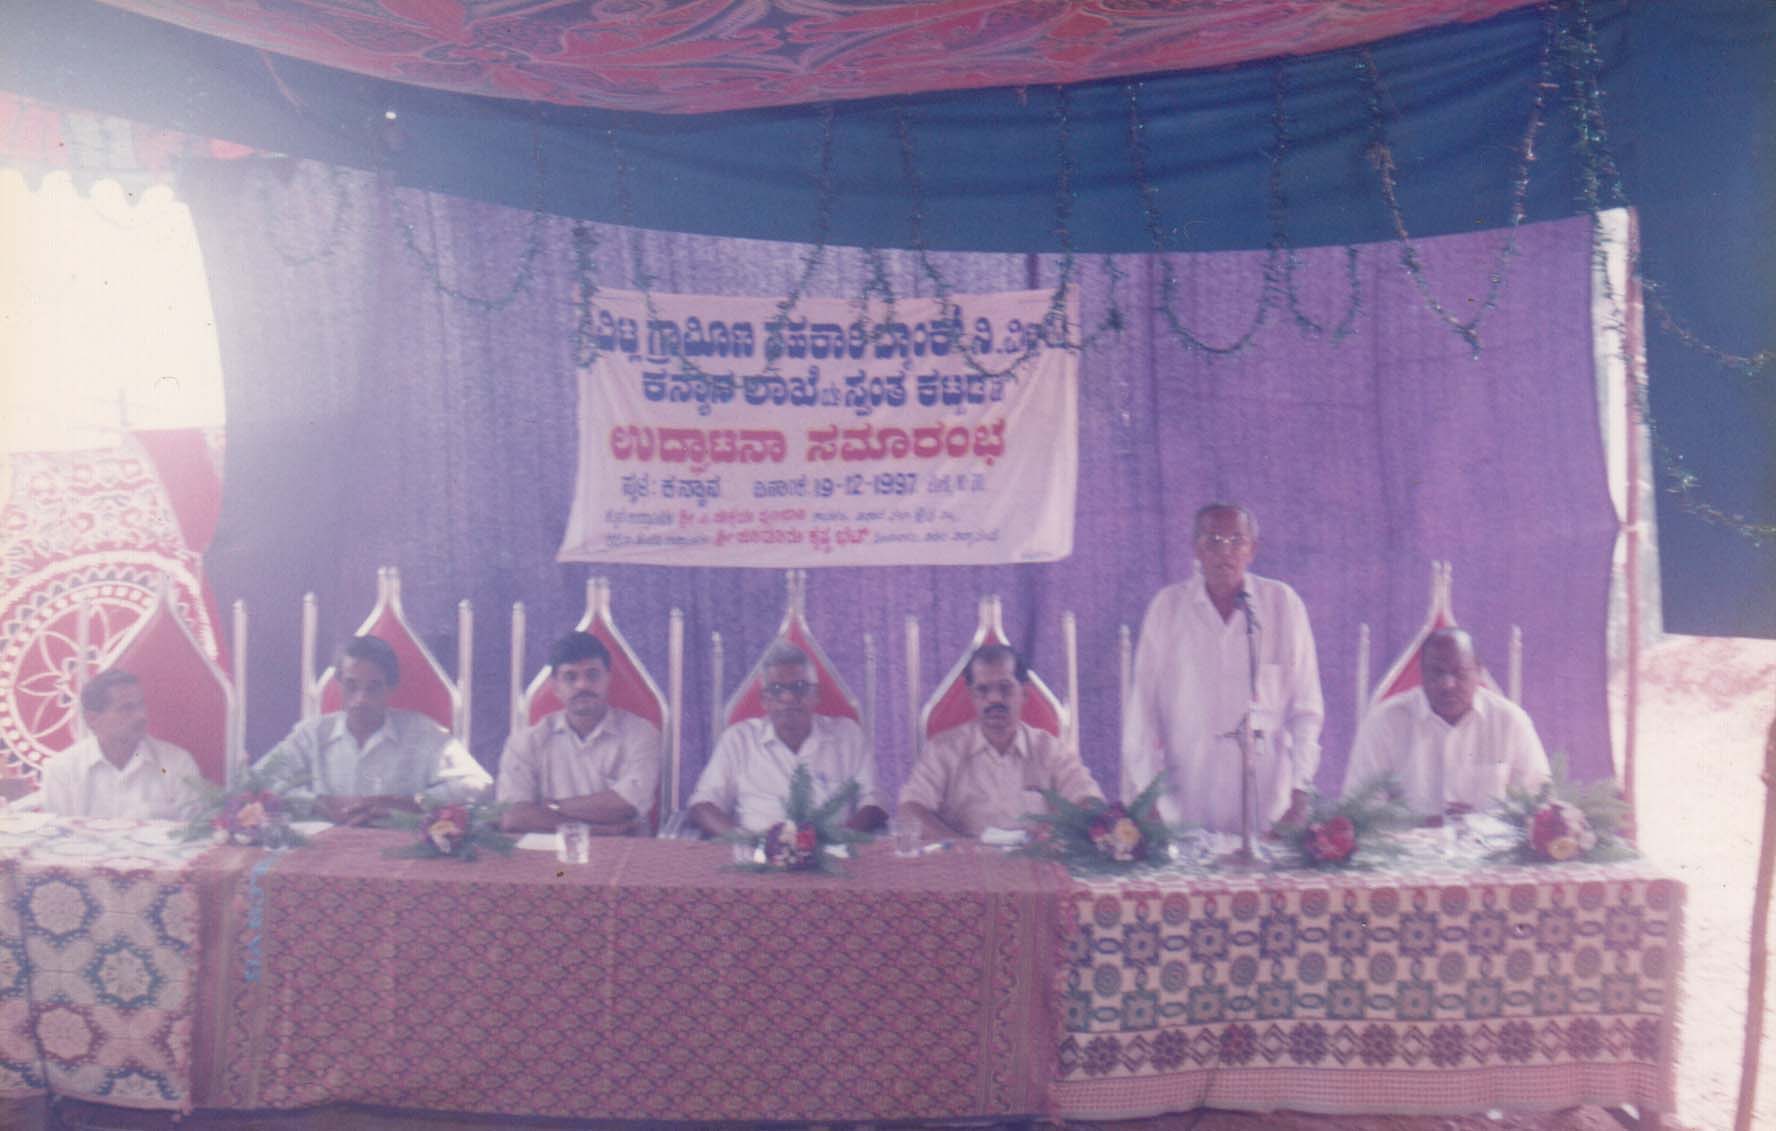 Inauguration of own building at Kanyana Branch in 1997